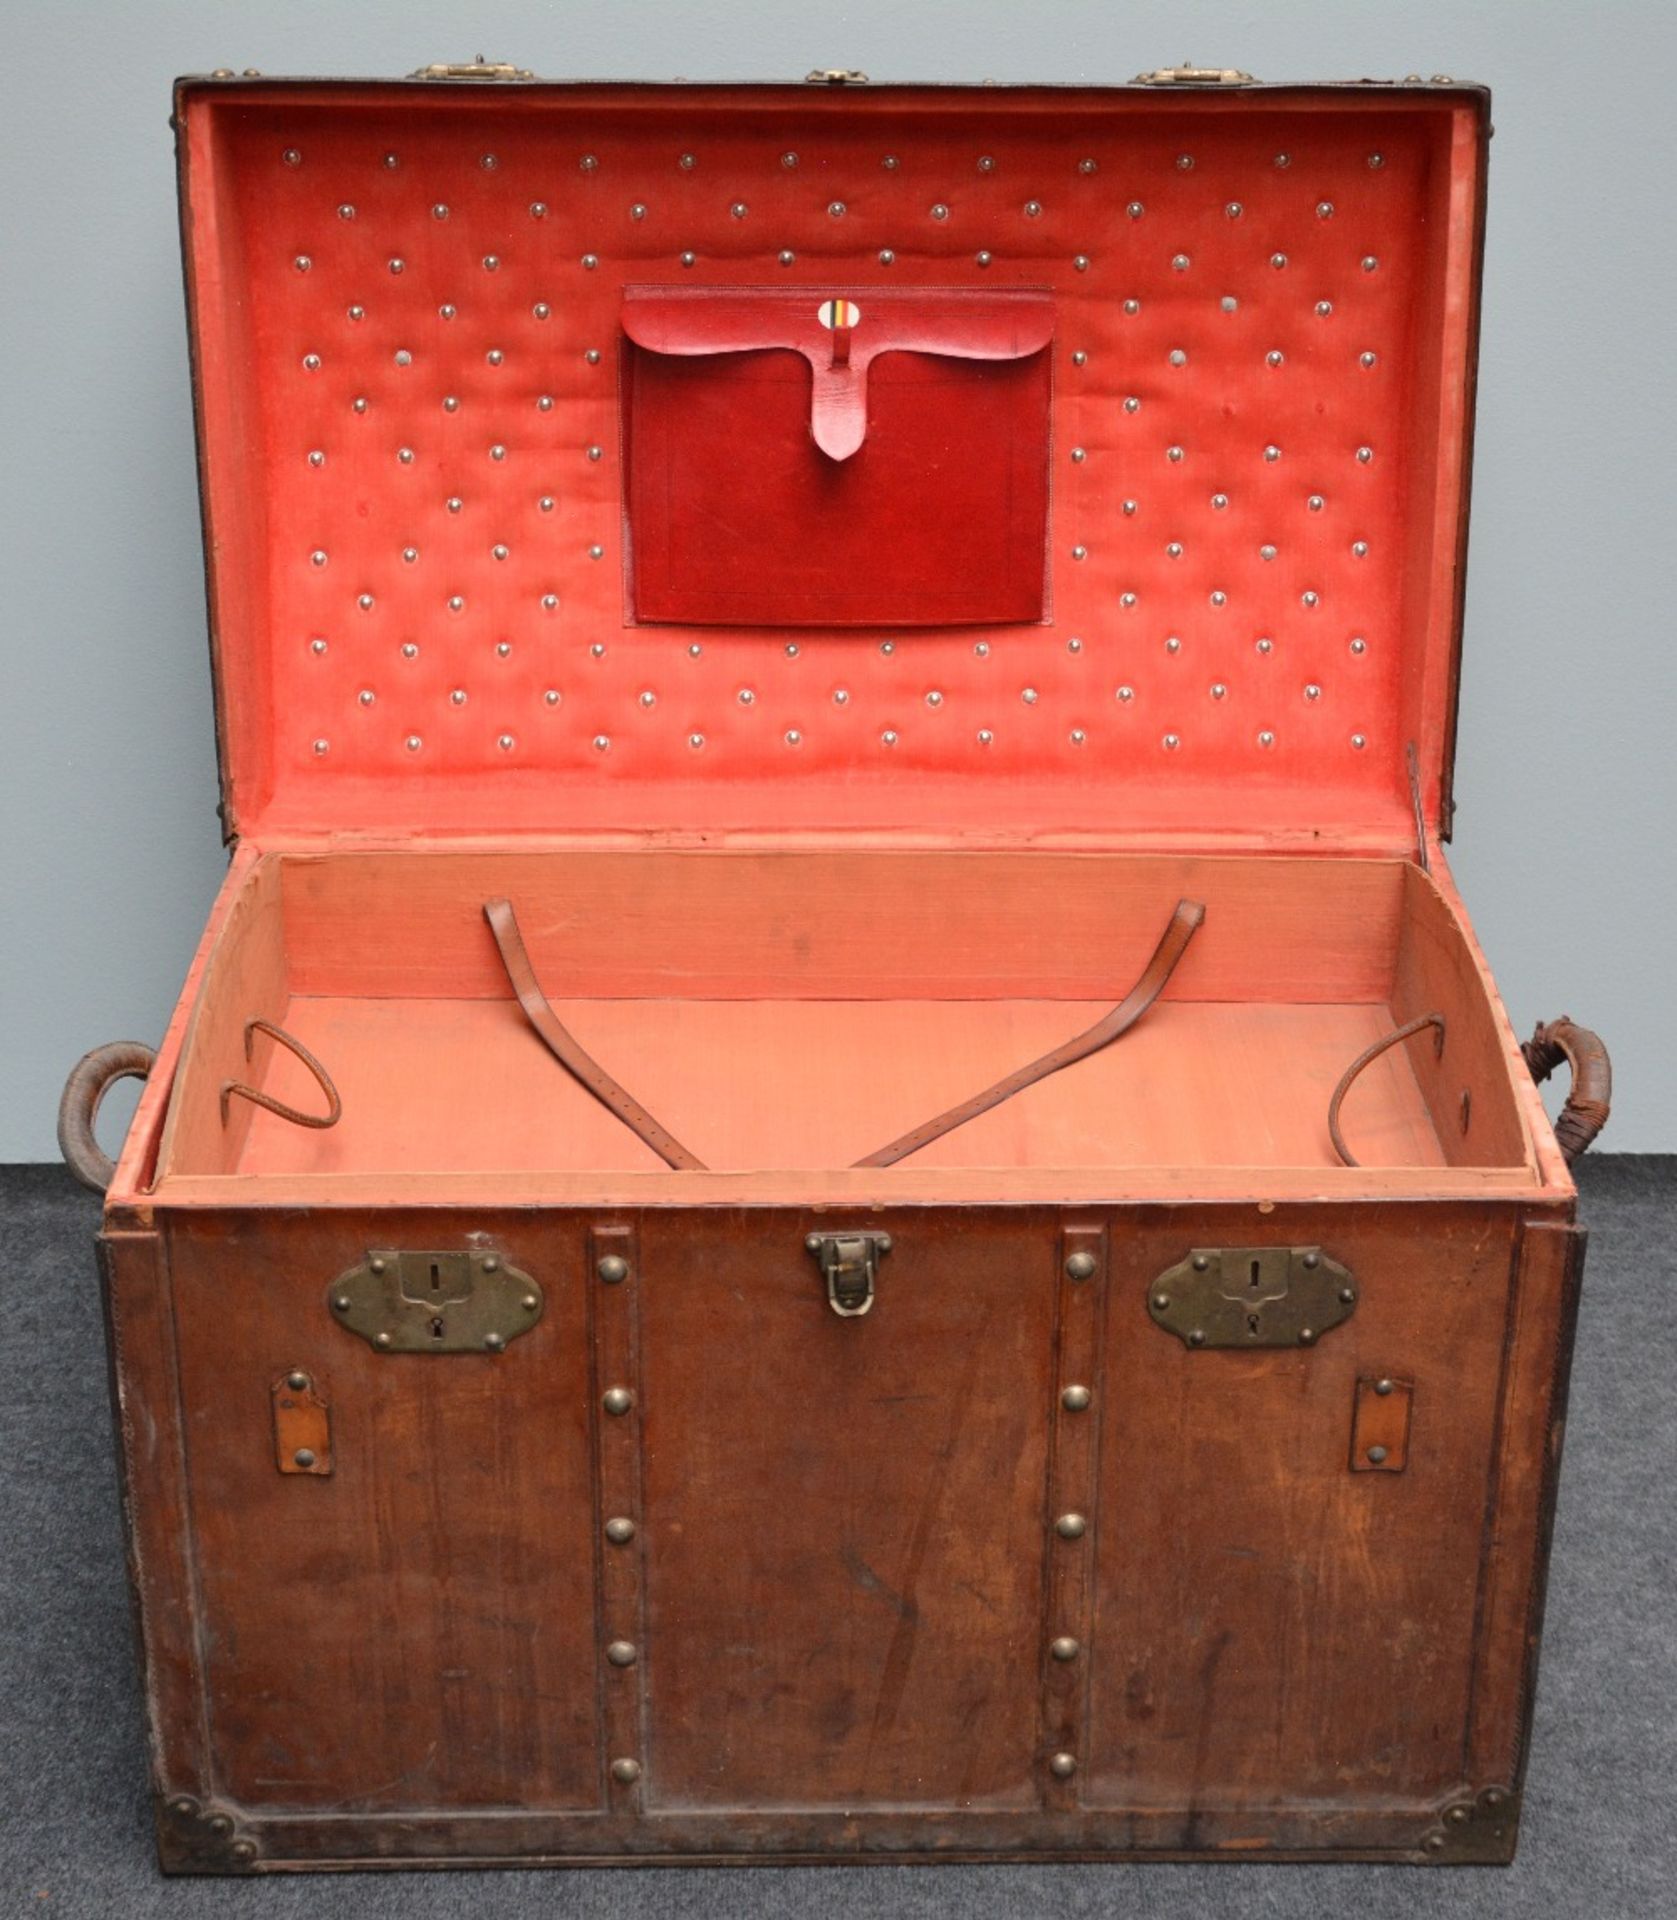 A luxurious leather travelling trunk, upholstered inside, with lift-out trays, H 67 - W 91 - D 55 cm - Image 6 of 7